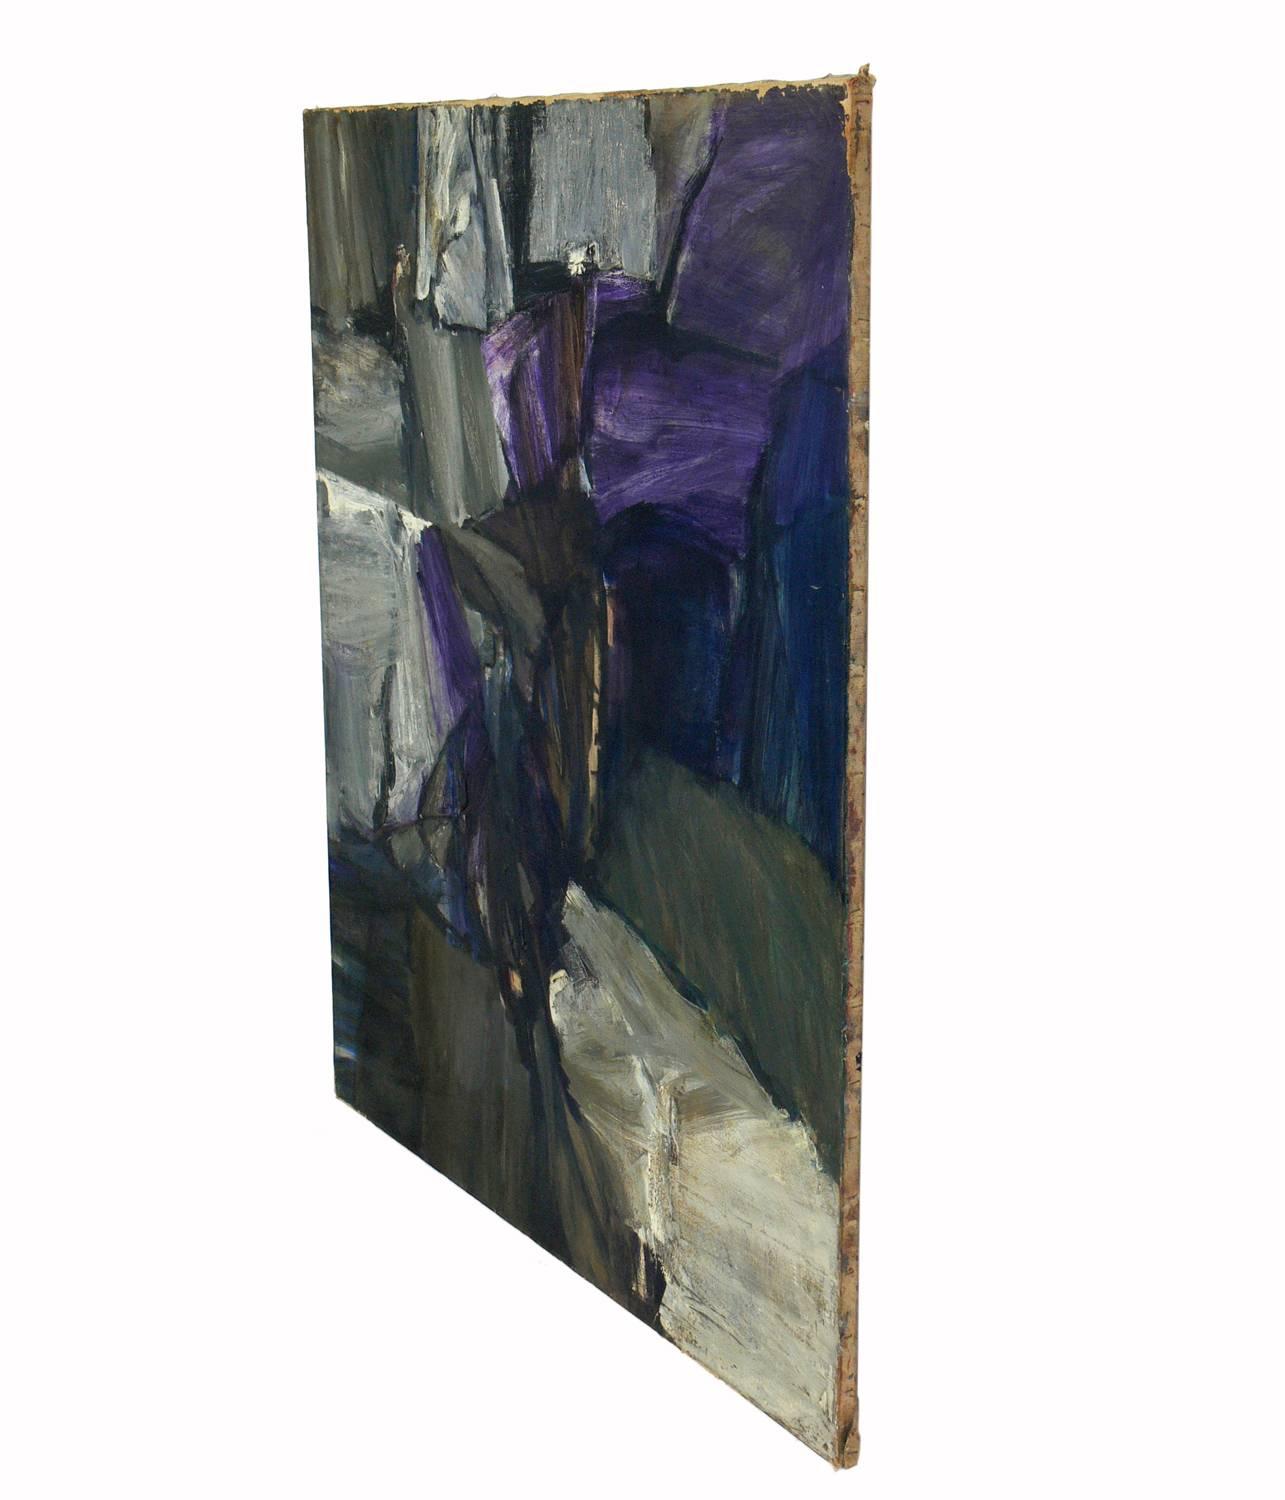 Large-scale abstract painting, American, circa 1960s. It measures an impressive 50.25